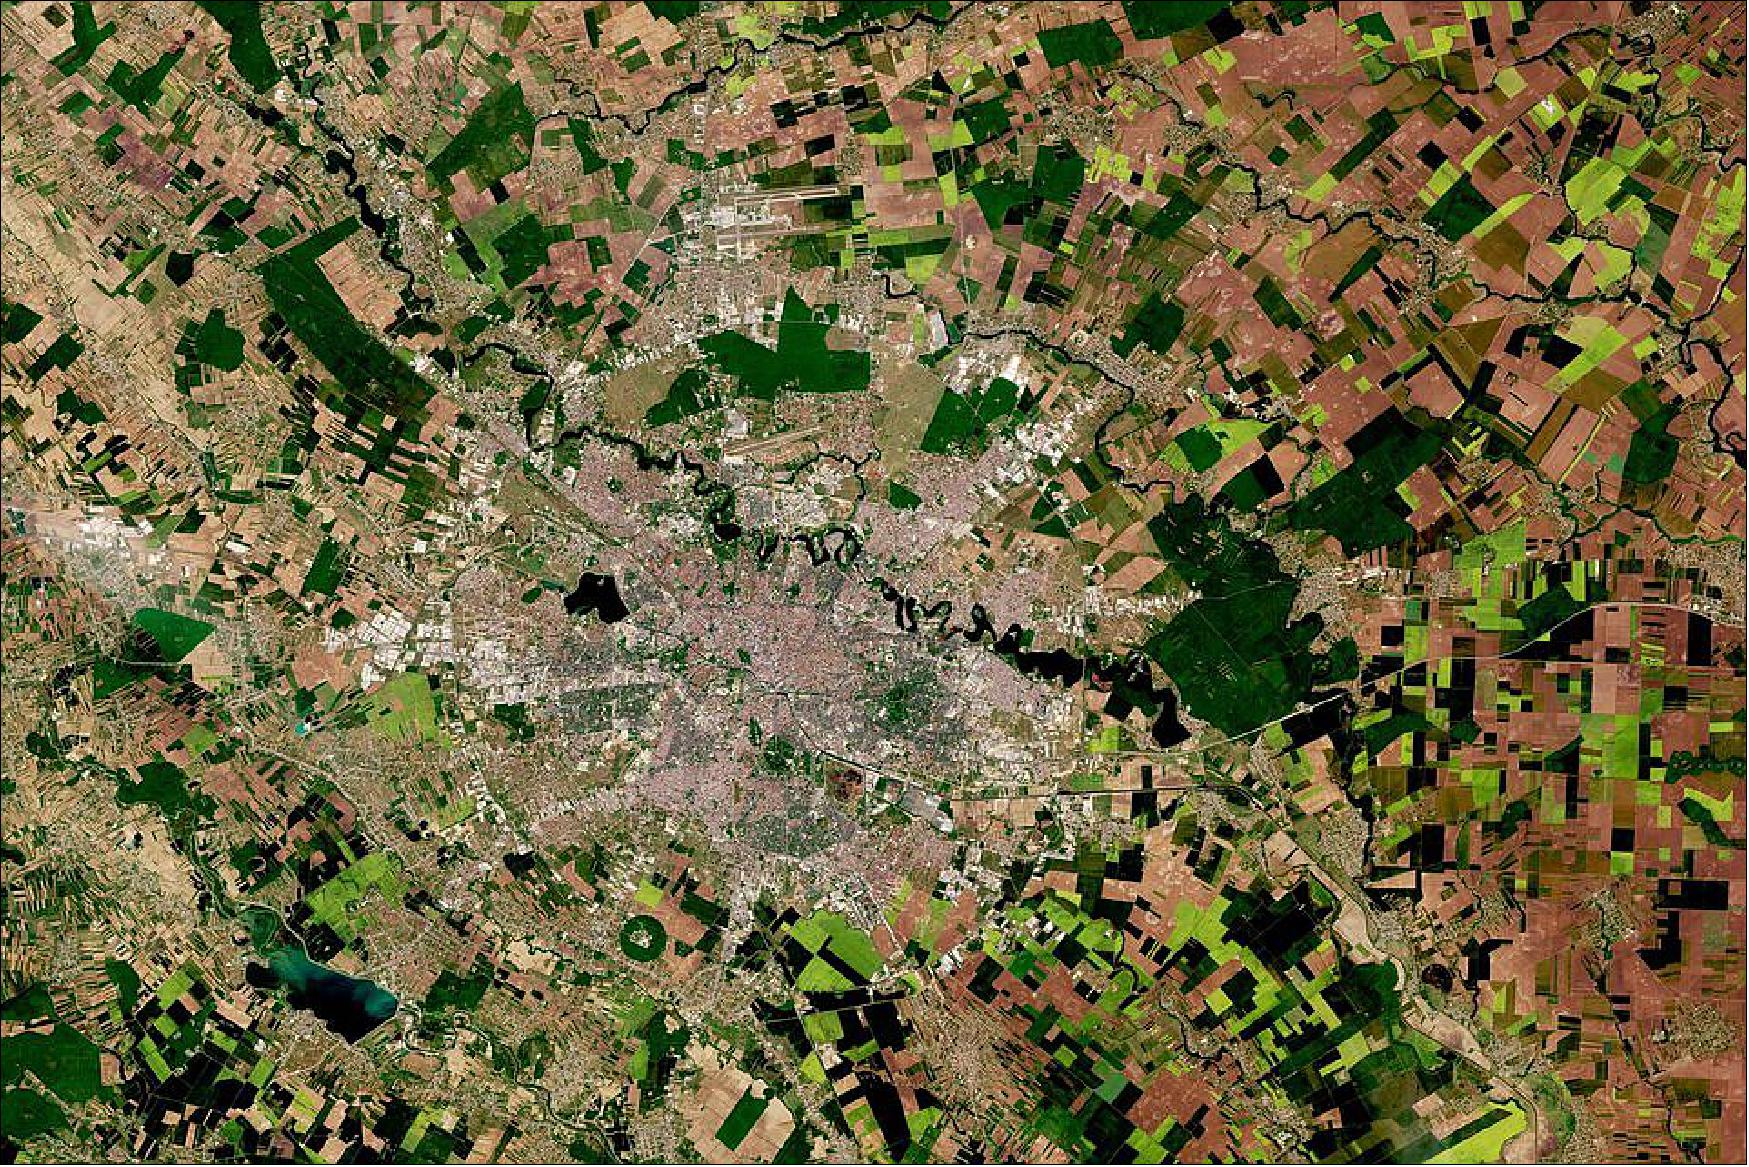 Figure 58: Bucharest lies on the southeast corner of the Romanian Plain, on the banks of the Dâmbovita River, a small tributary of the Danube. The city covers an area of around 225 km2, in an area once covered by the Vlăsiei forest, which, after it was cleared, gave way to a fertile flatland. This image is also featured on the Earth from Space video program (image credit: ESA, the image contains modified Copernicus Sentinel data (2020), processed by ESA, CC BY-SA 3.0 IGO)